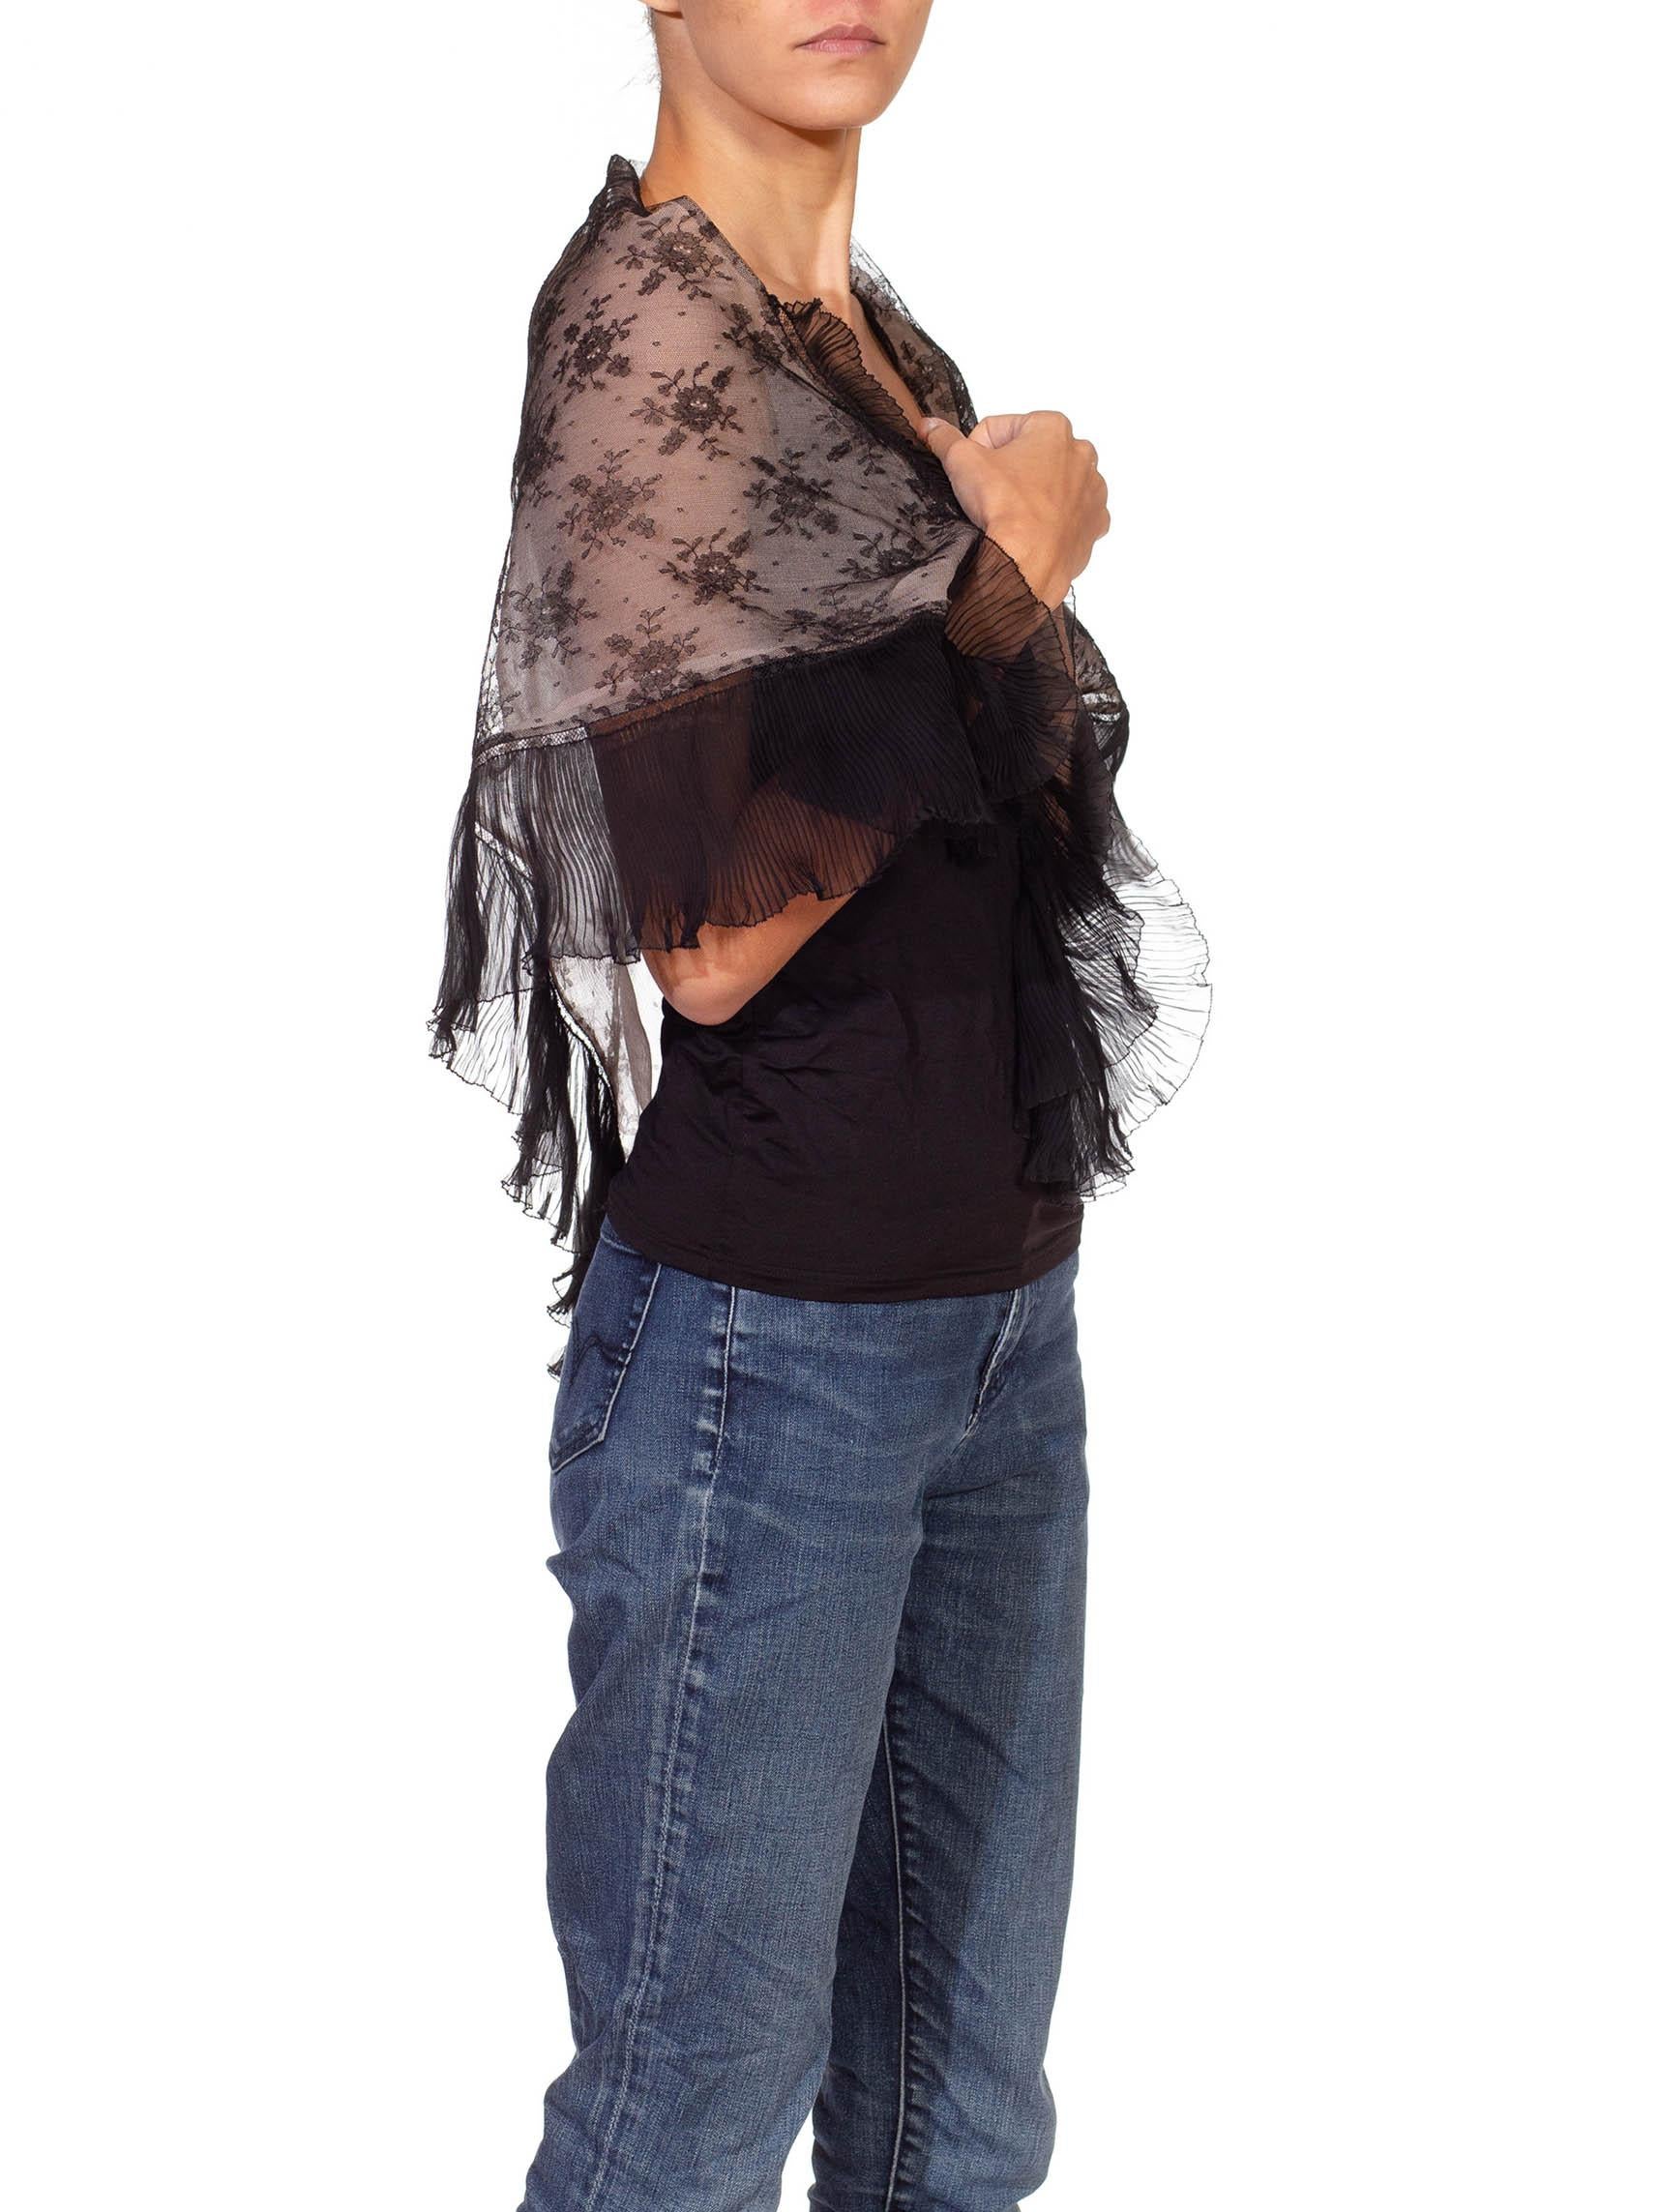 Women's Victorian Blush Pink Black Lace Shawl For Sale